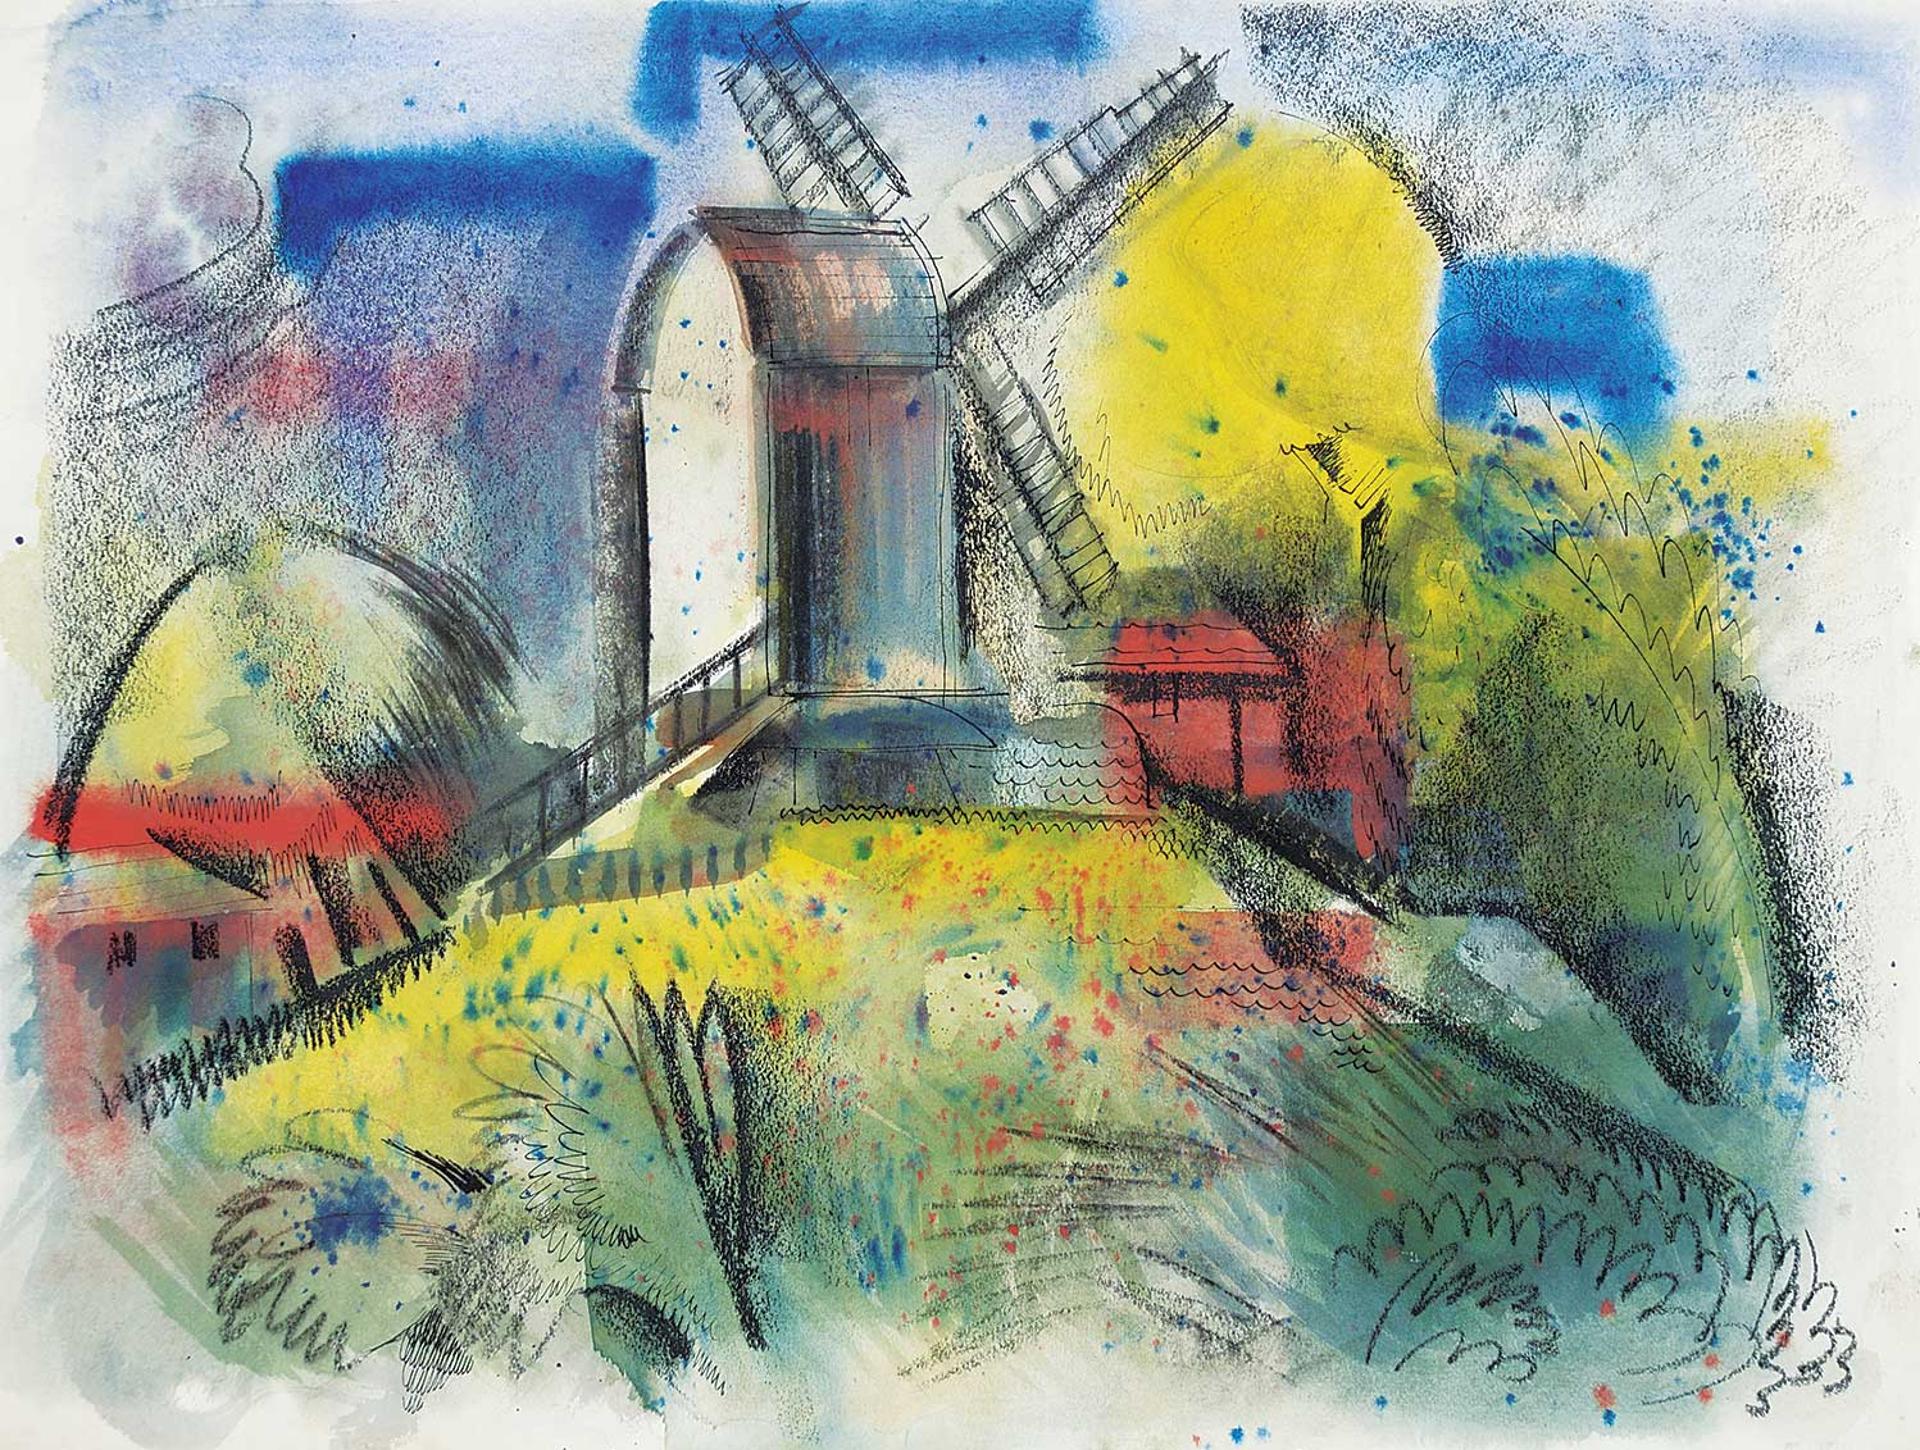 Henry George Glyde (1906-1998) - Untitled - The Windmill